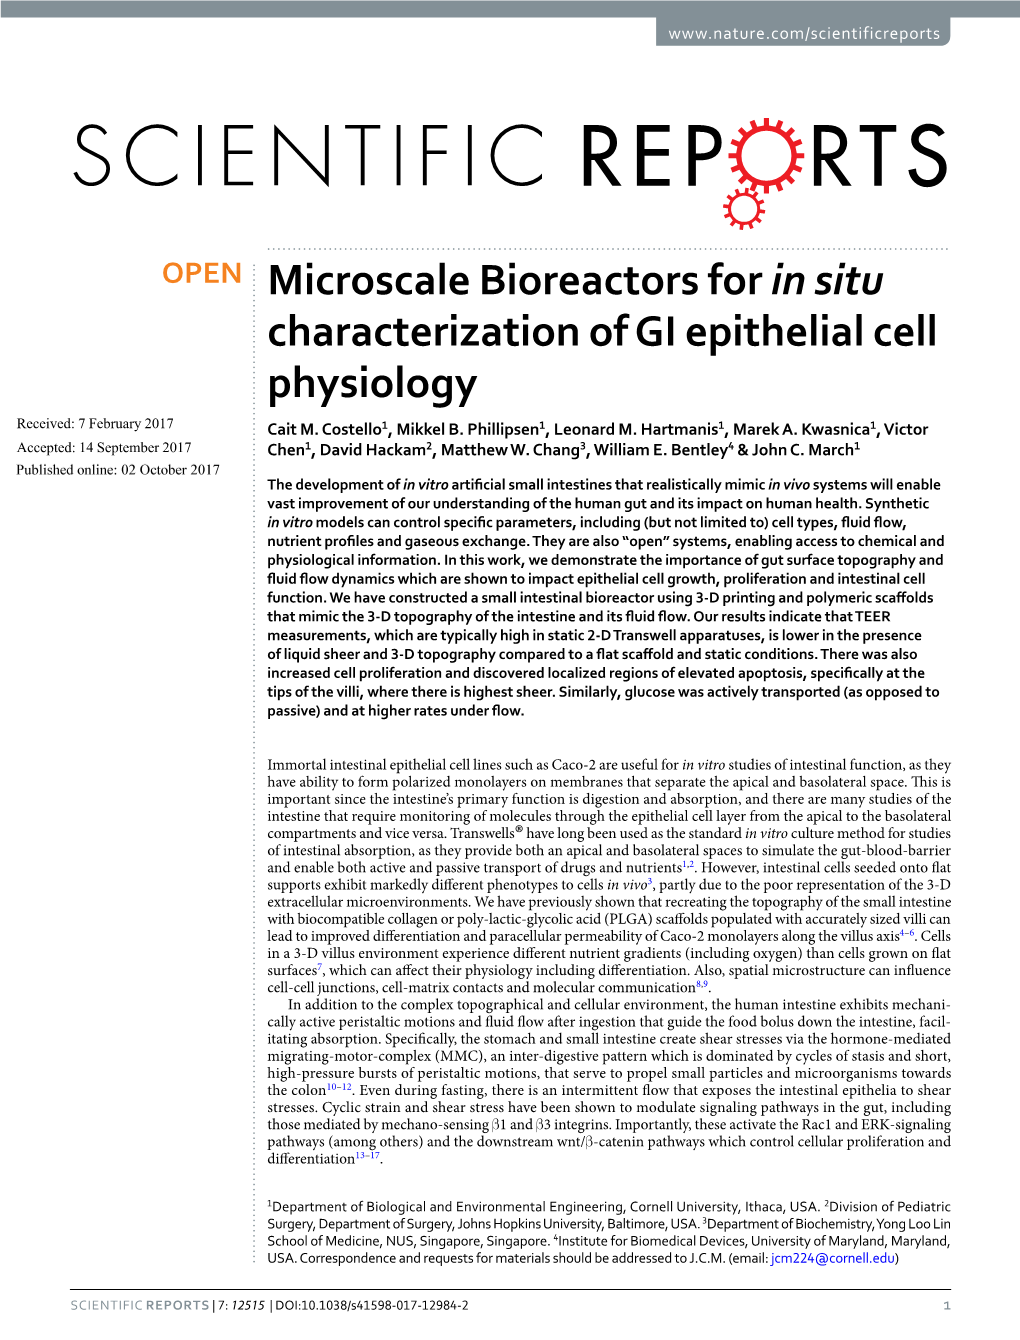 Microscale Bioreactors for in Situ Characterization of GI Epithelial Cell Physiology Received: 7 February 2017 Cait M